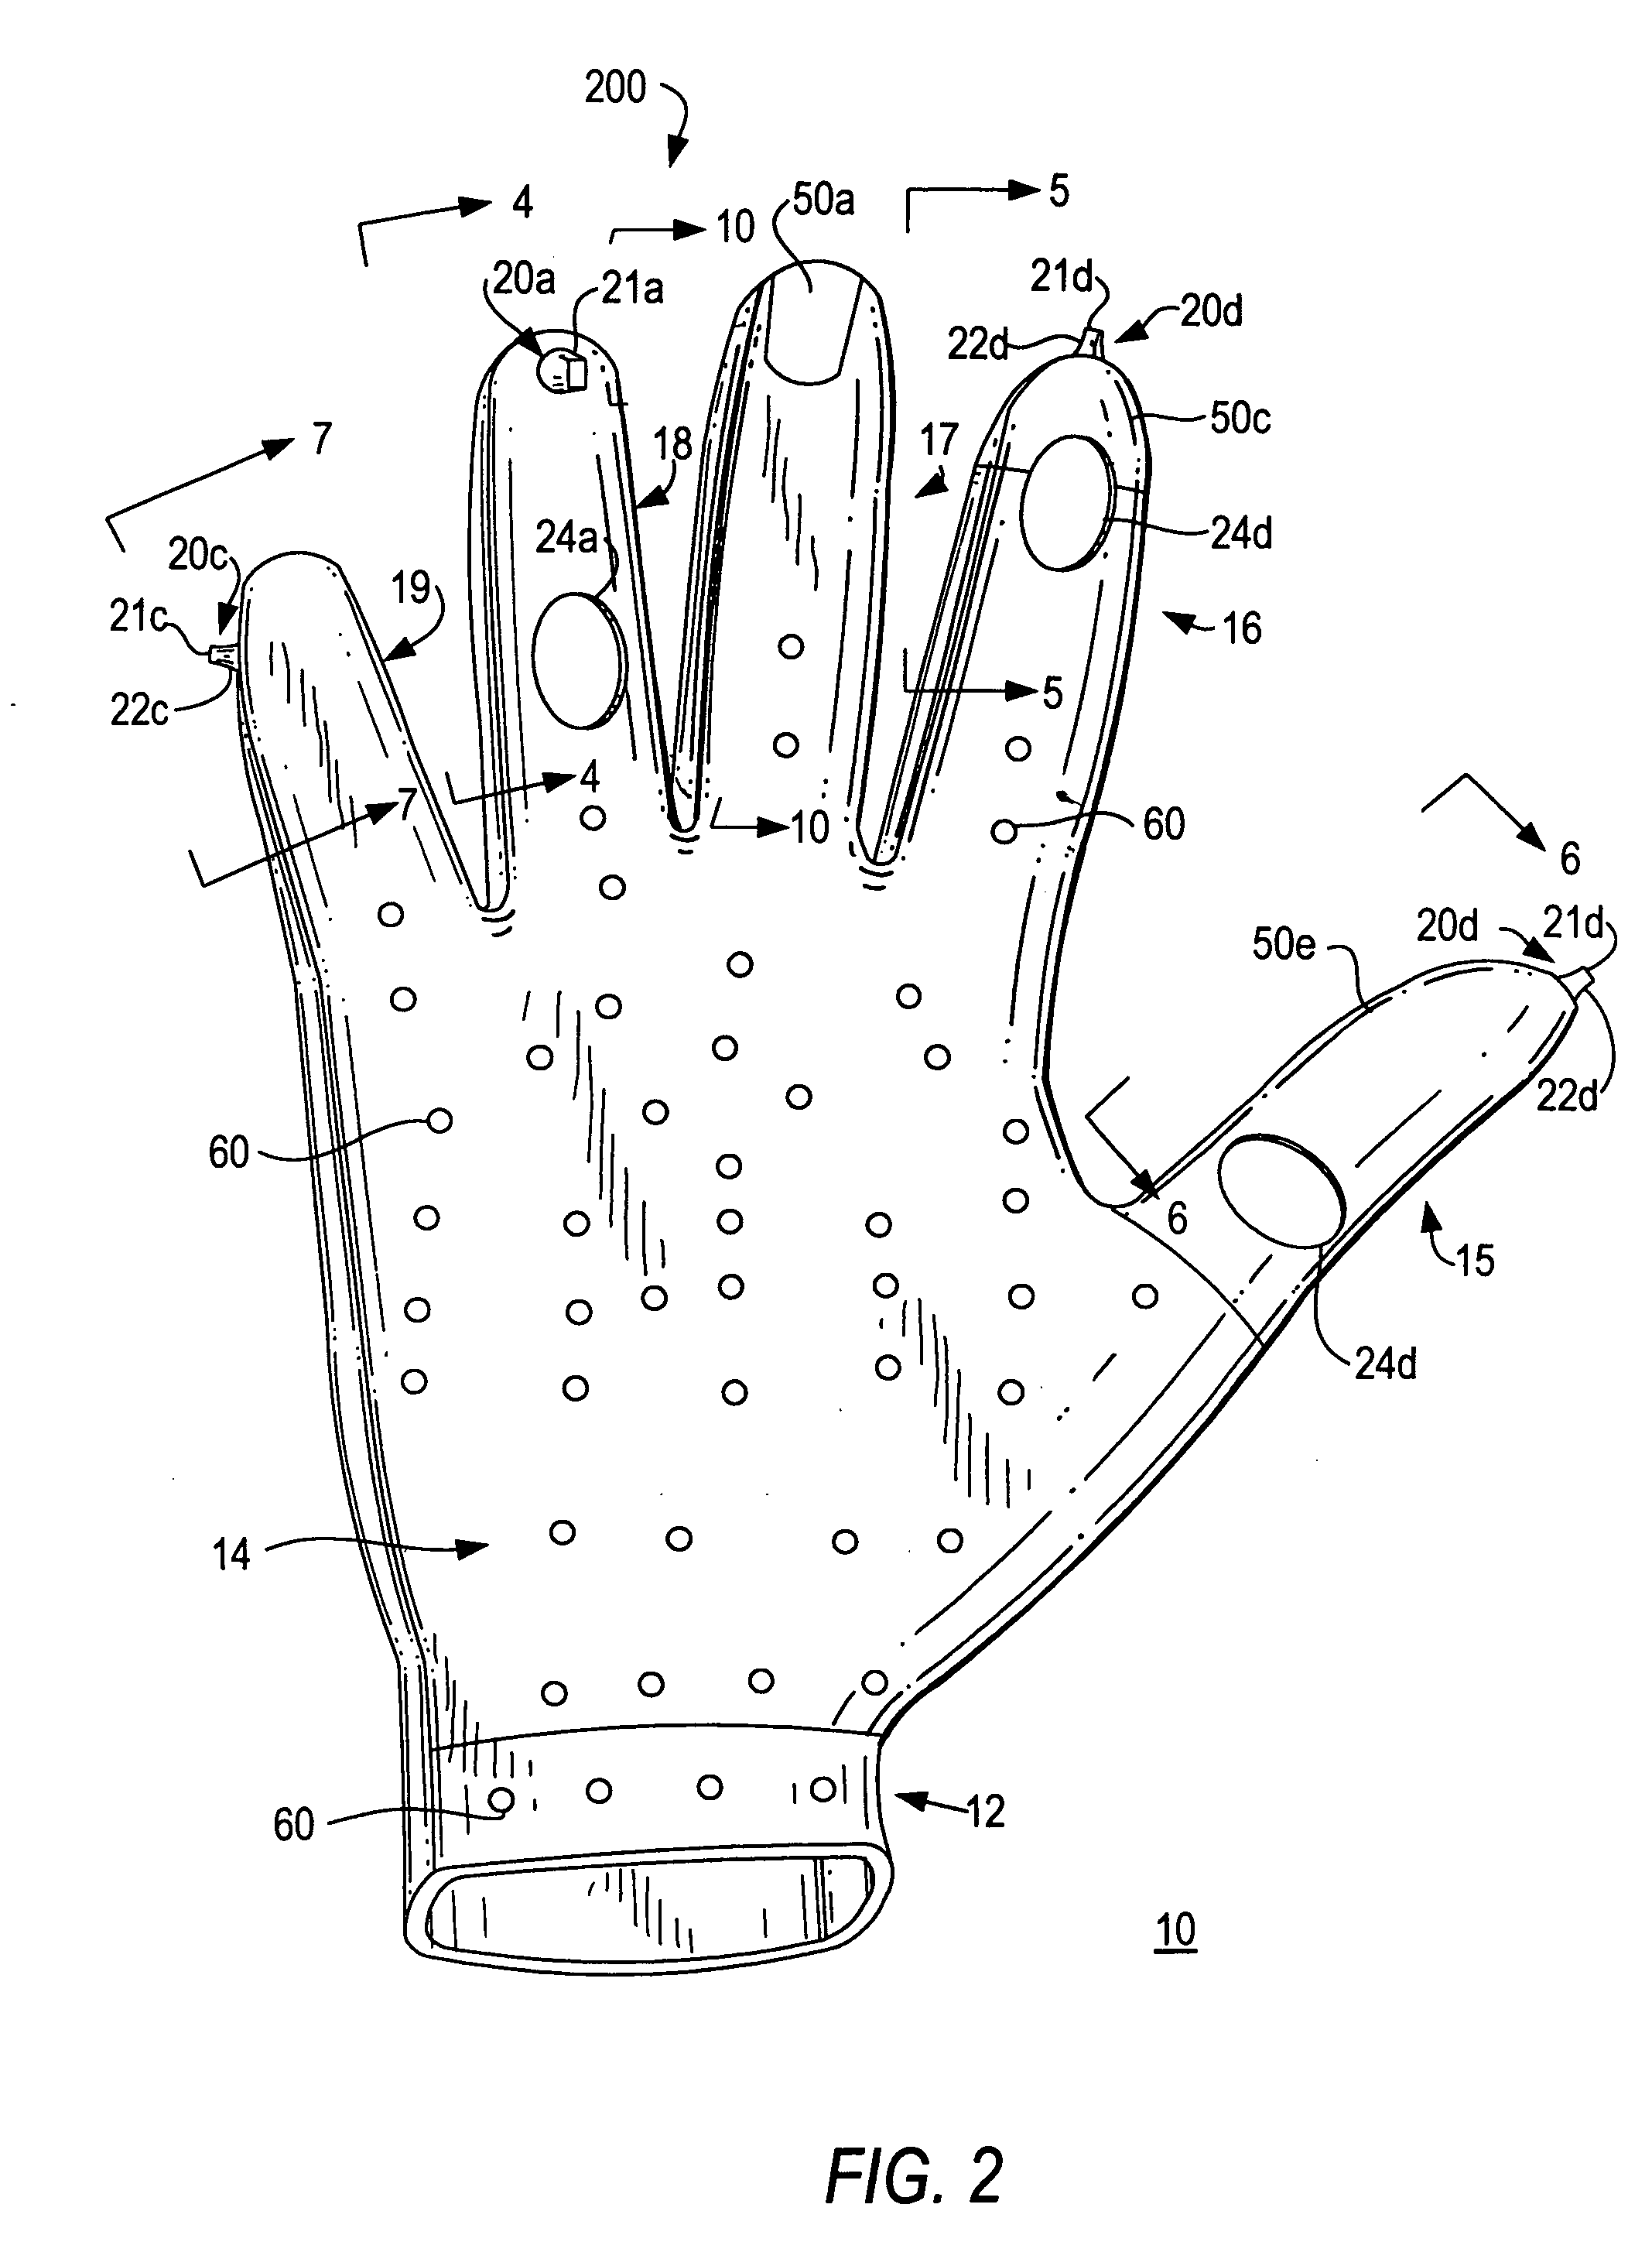 Hand covering features for the manipulation of small devices